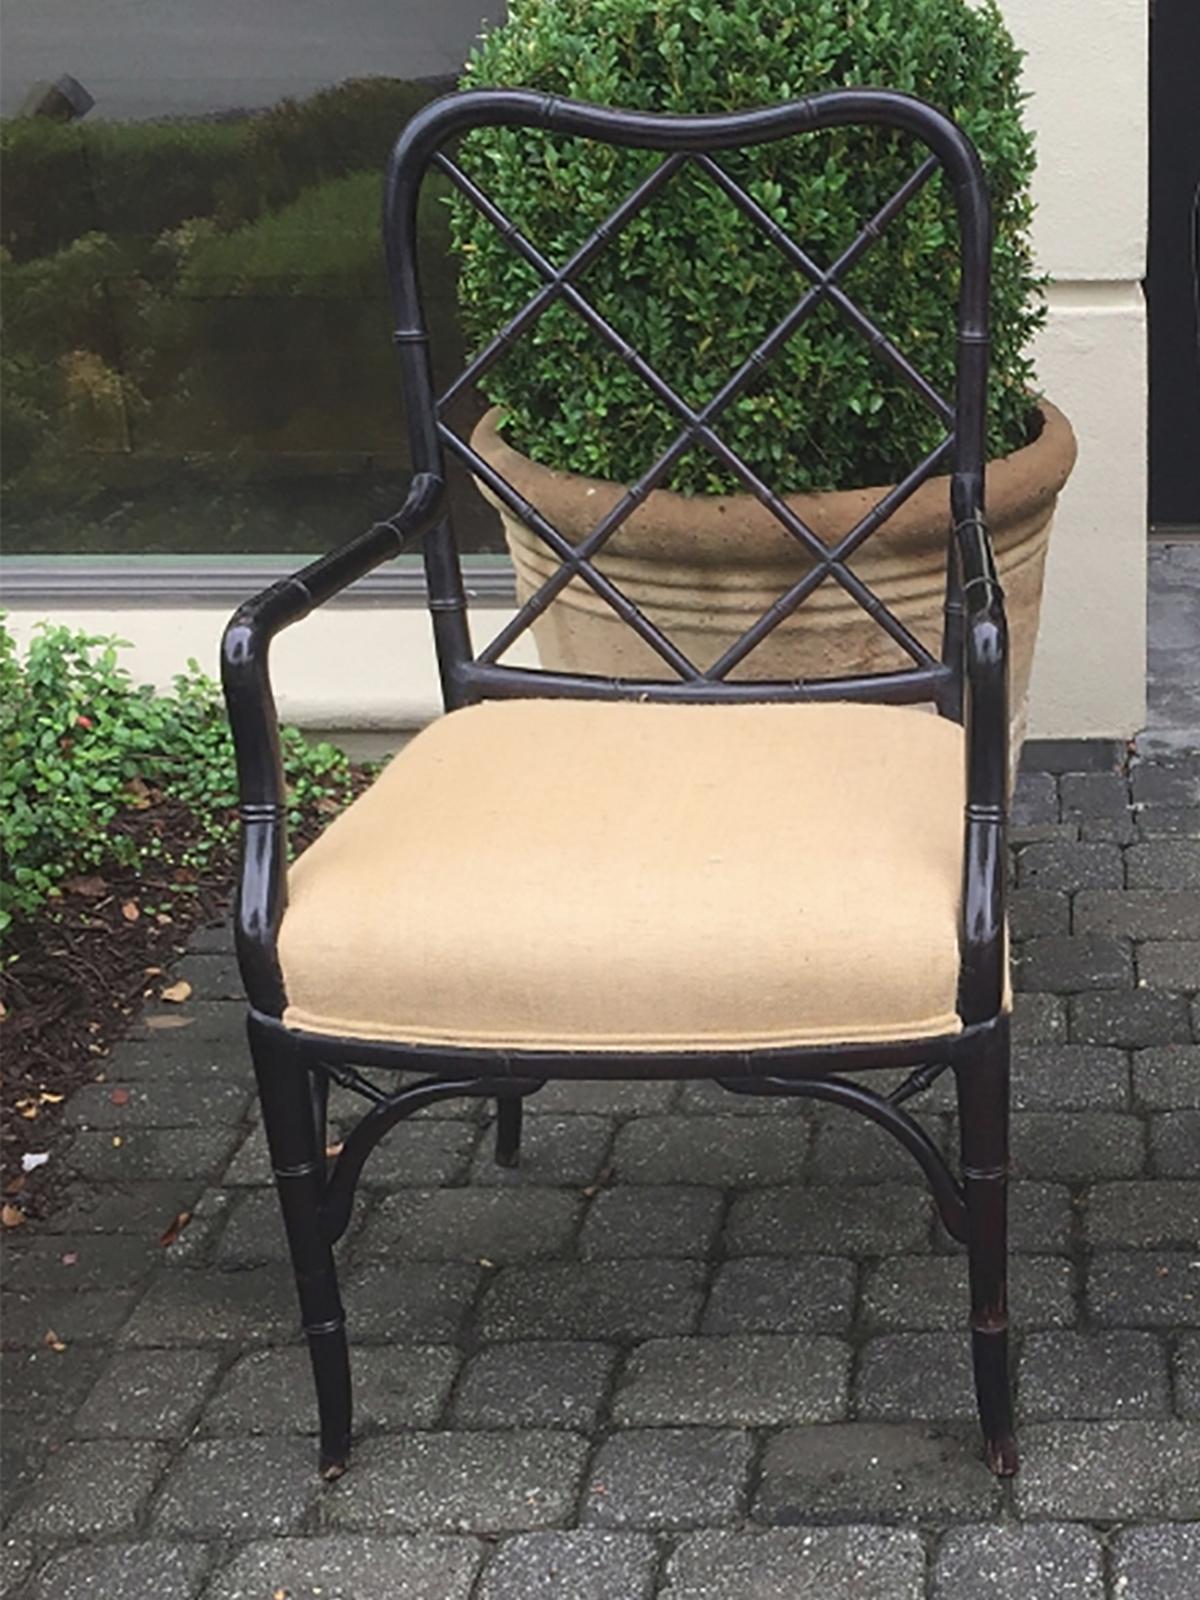 Faux bamboo black painted armchair, circa 1940-1950s
Great scale, comfortable
Measures: 23